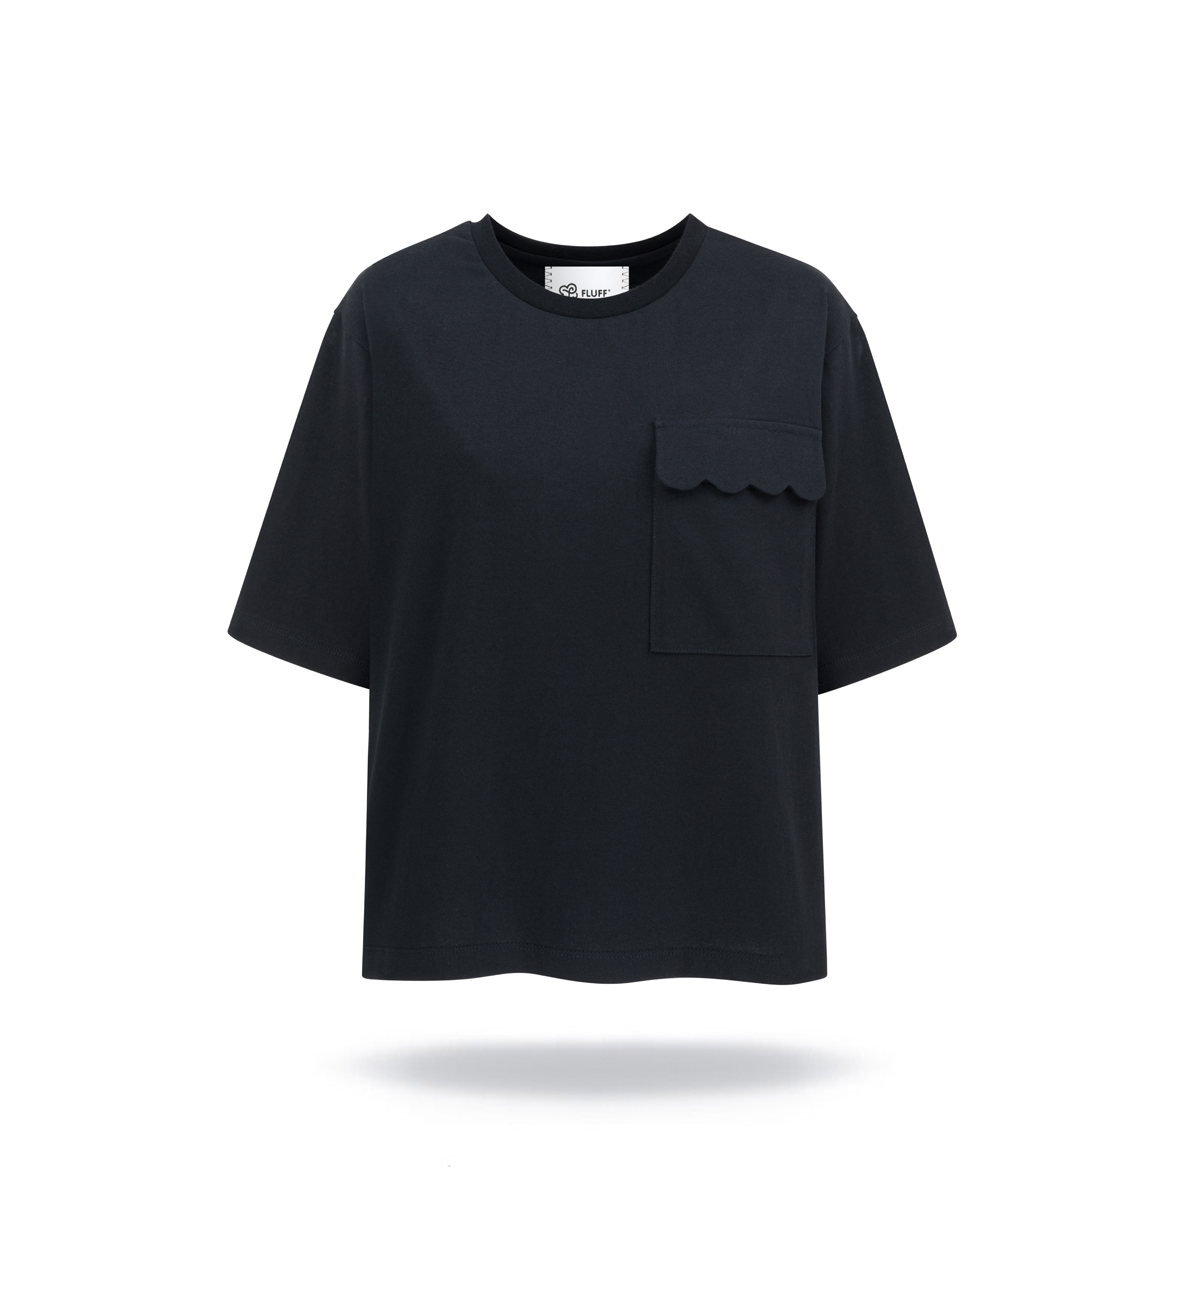 Rich cotton t-shirt, soft material, round neck and elbow sleeves. Wavy application on the front pocket.